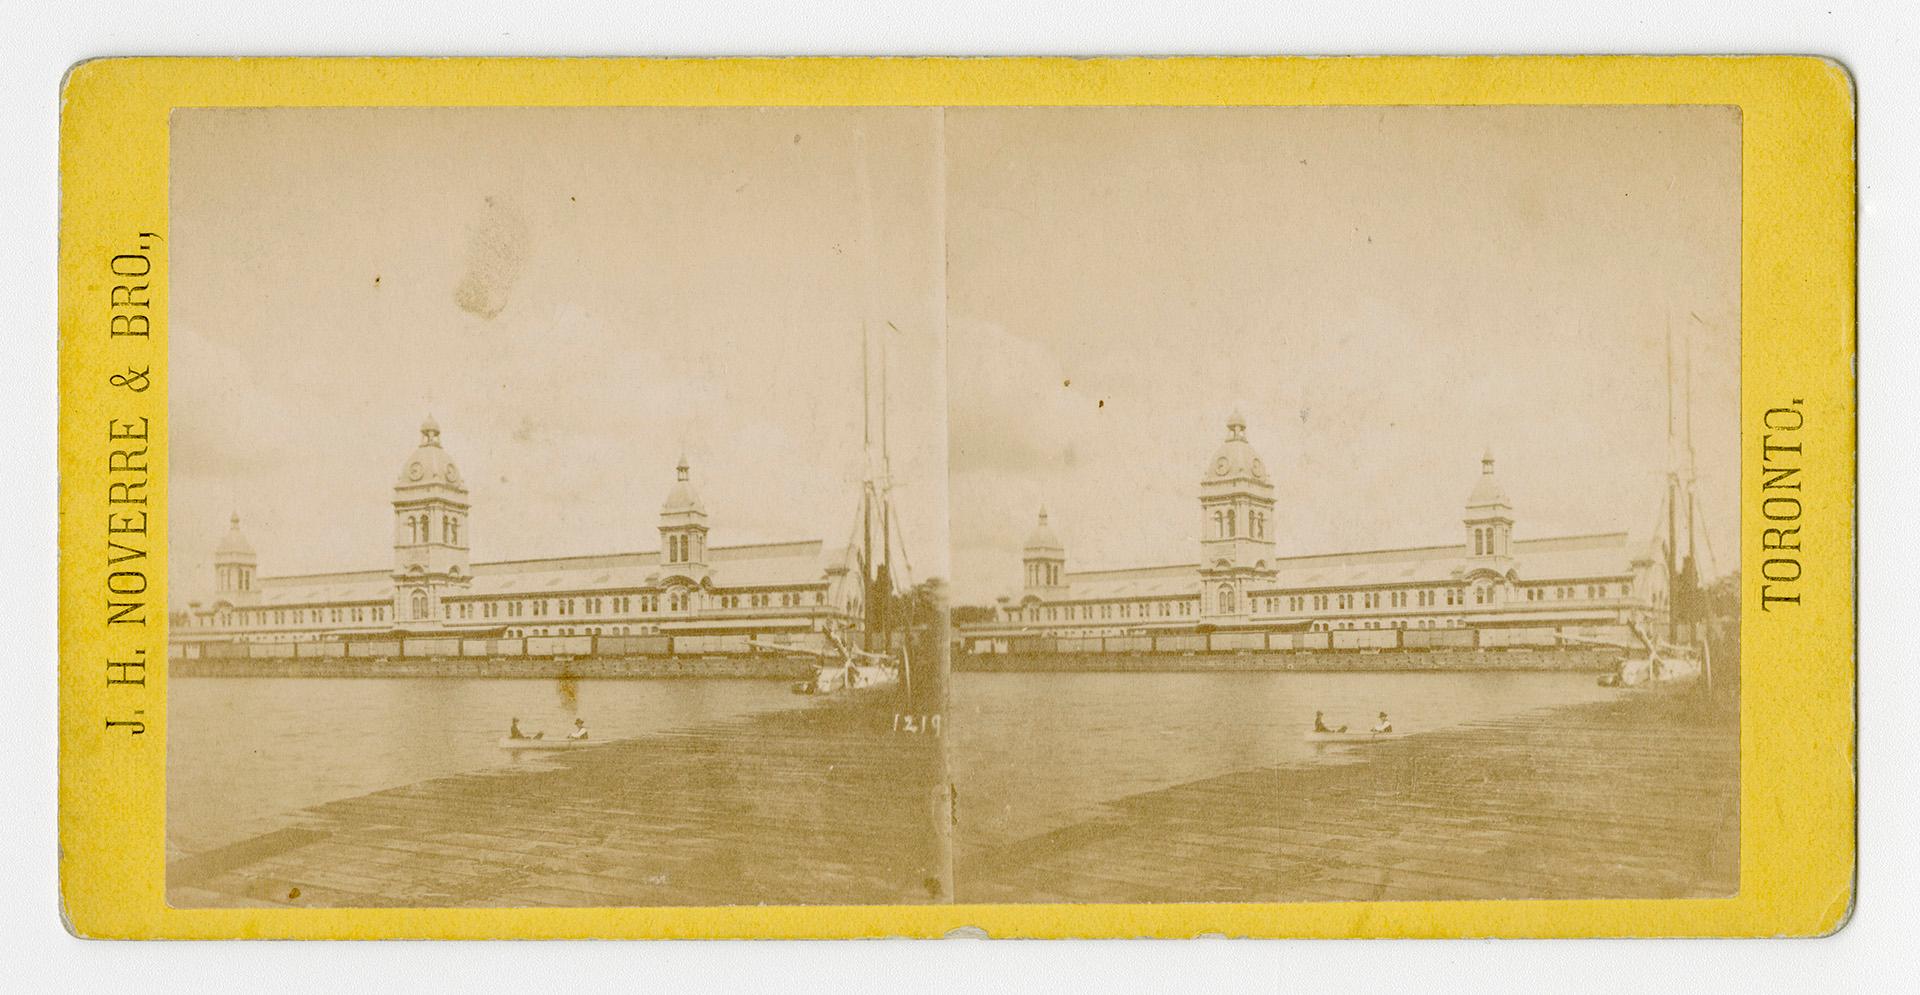 Pictures show a long low-rise public building with three towers beside a body of water.